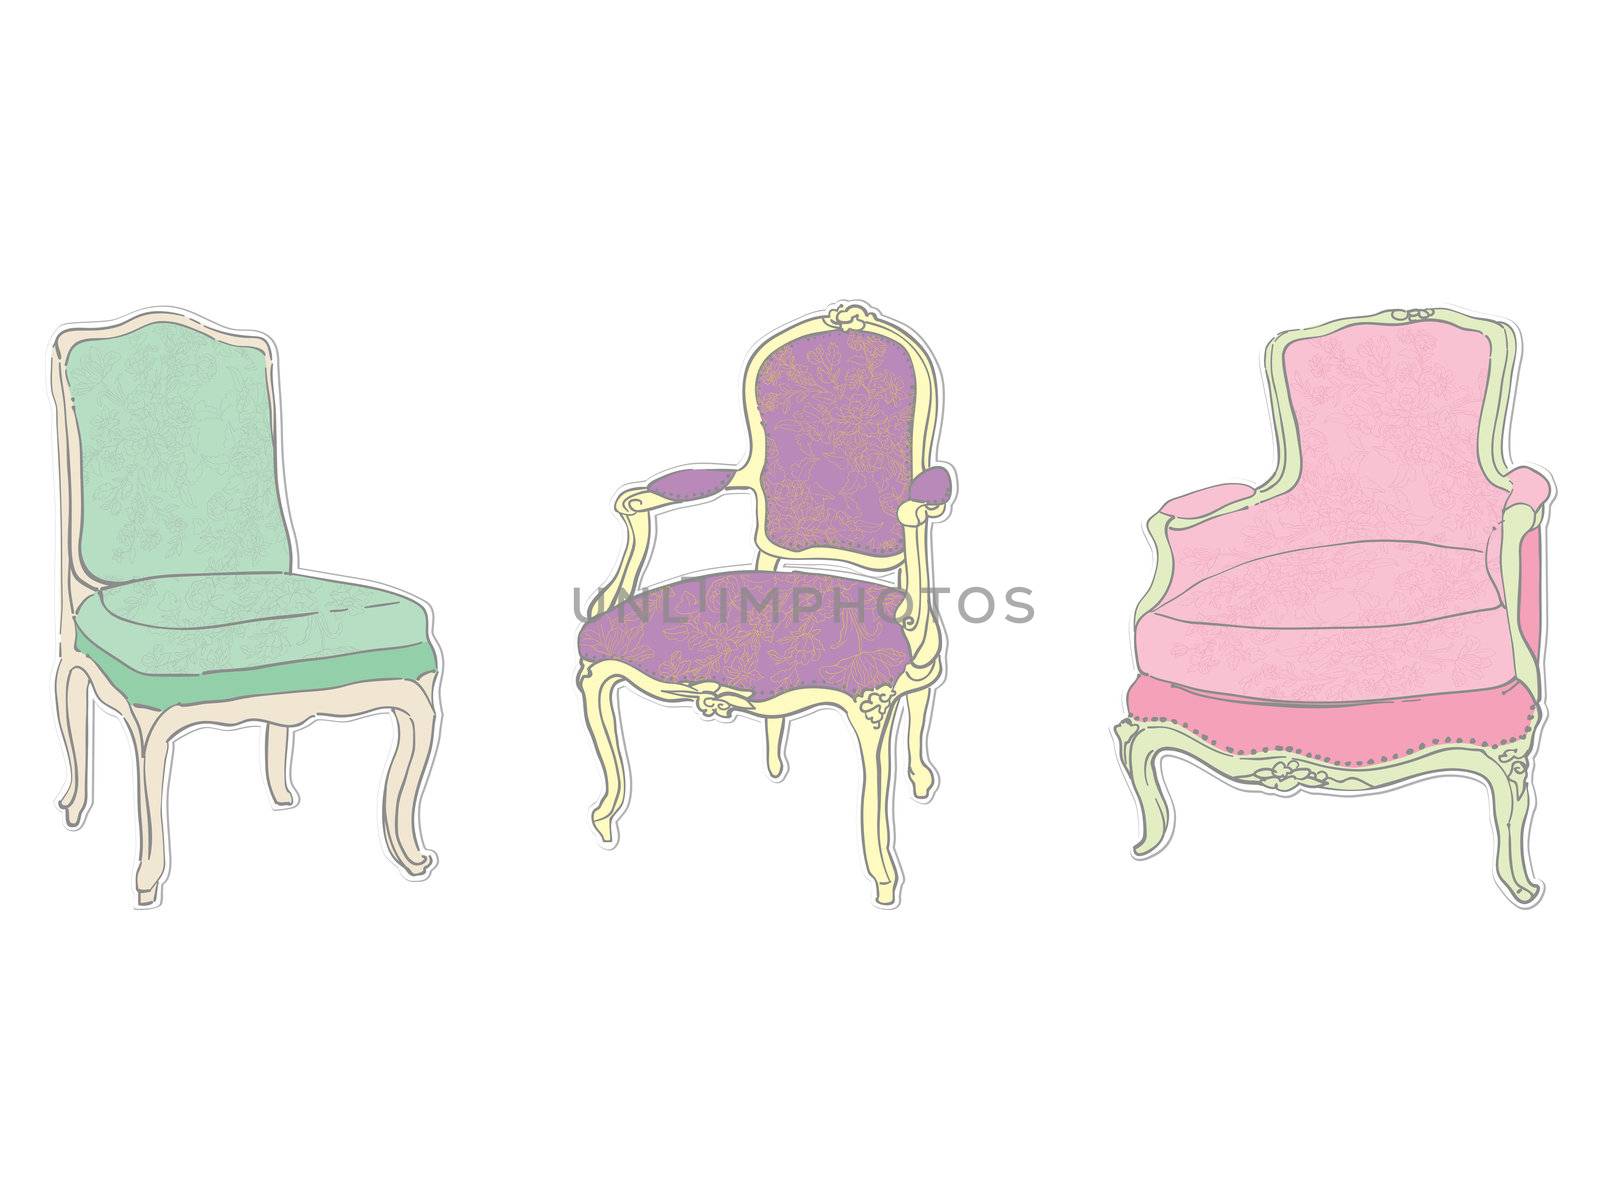 antique rococo chairs stickers by catacos